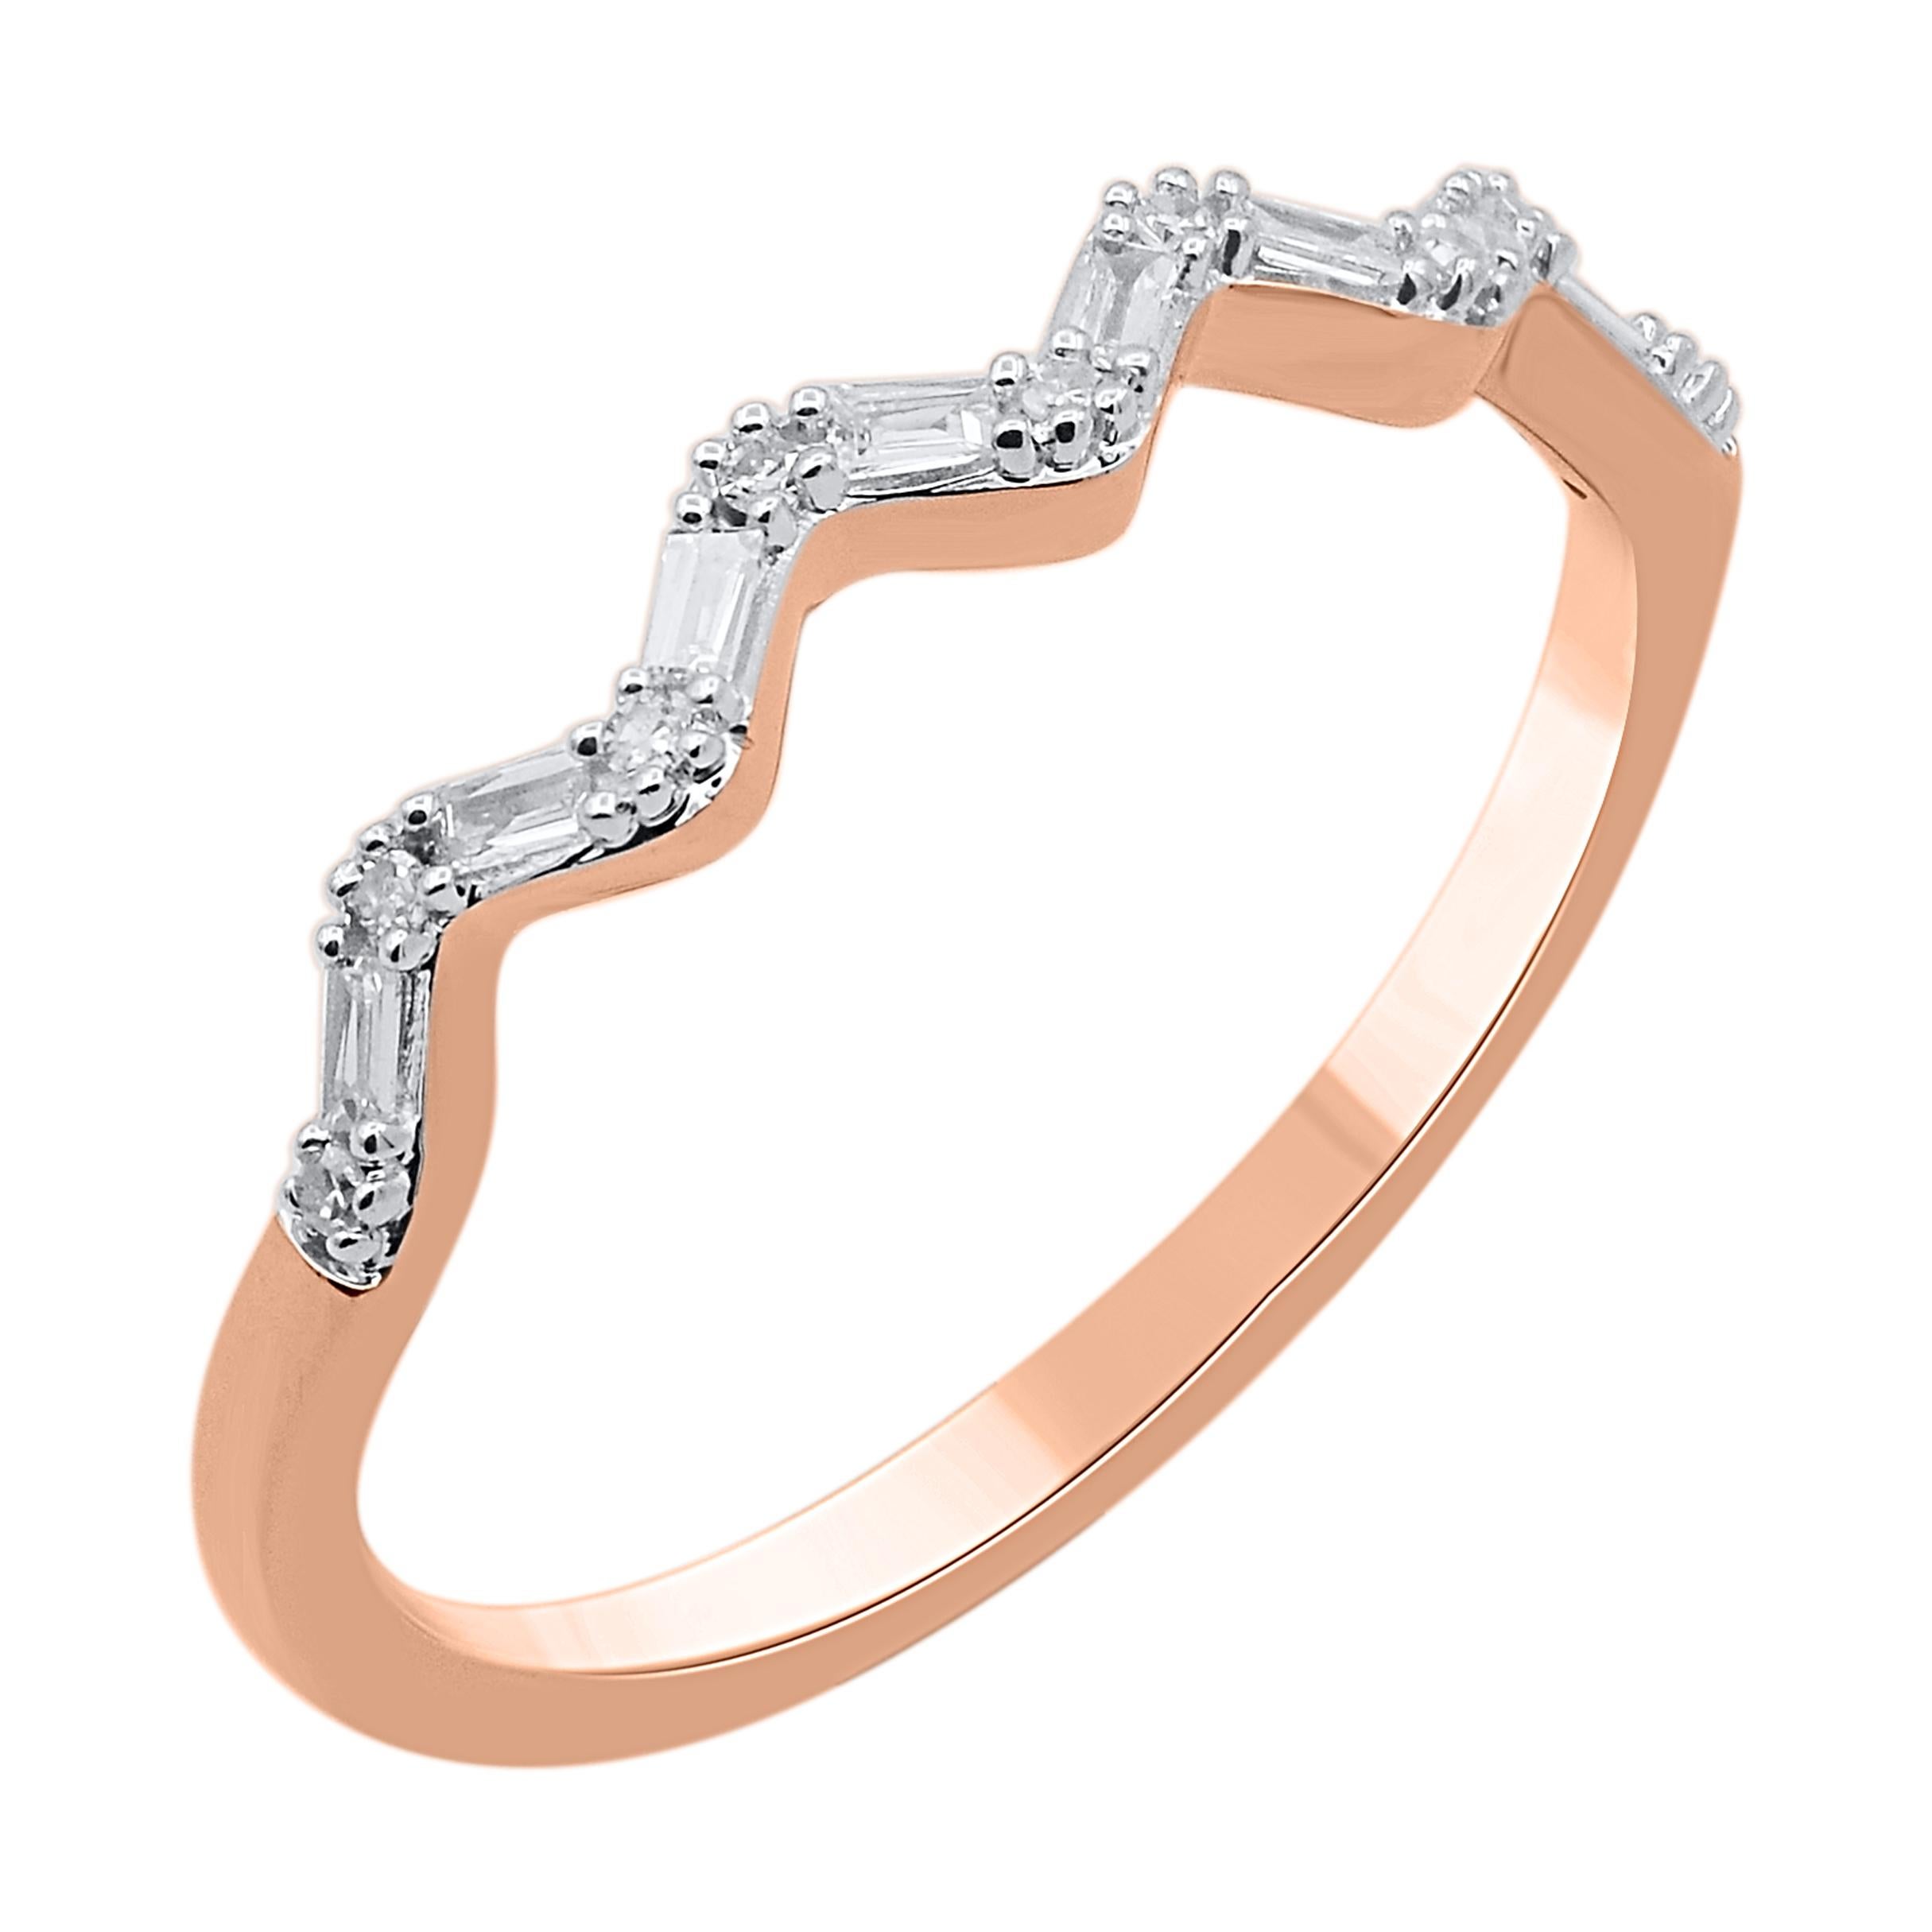 Celebrate all the wonderful little things with this slim diamond anniversary band. This ring is beautifully crafted in 14 Karat rose gold and embedded with 17 single cut round diamonds & baguette diamond set in prong setting. Total diamond weight is